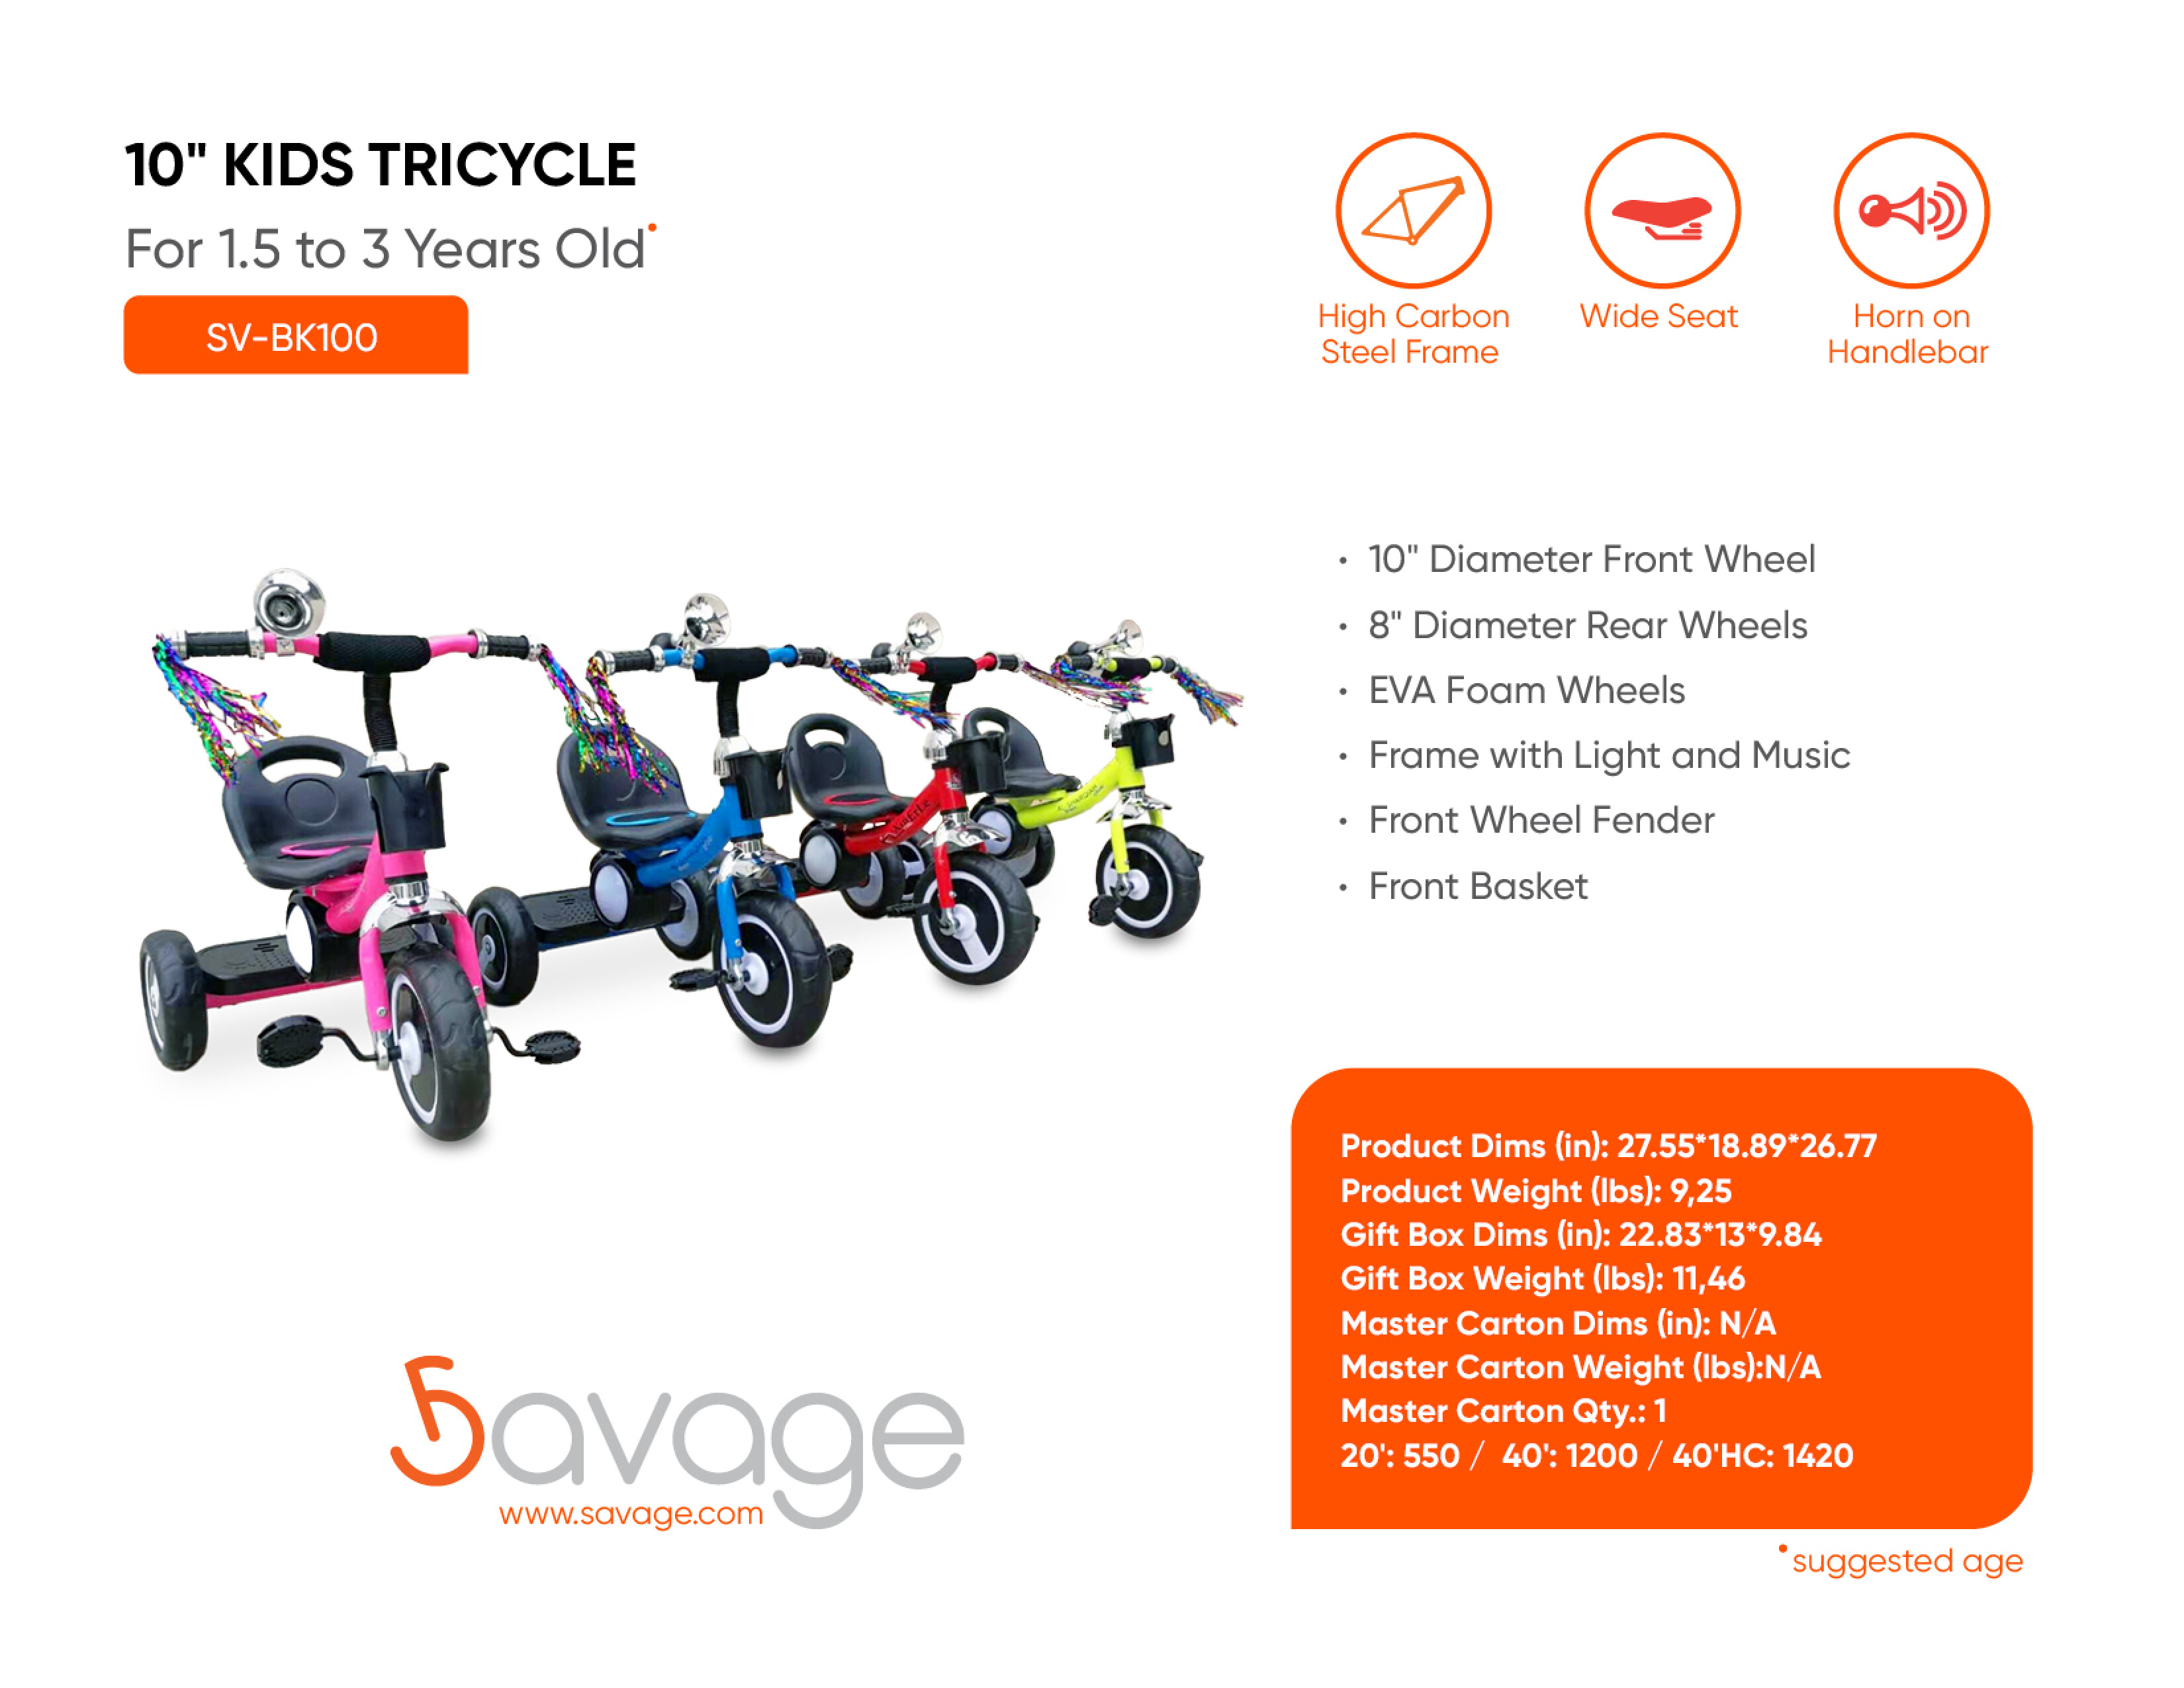 10" Kids Tricycle